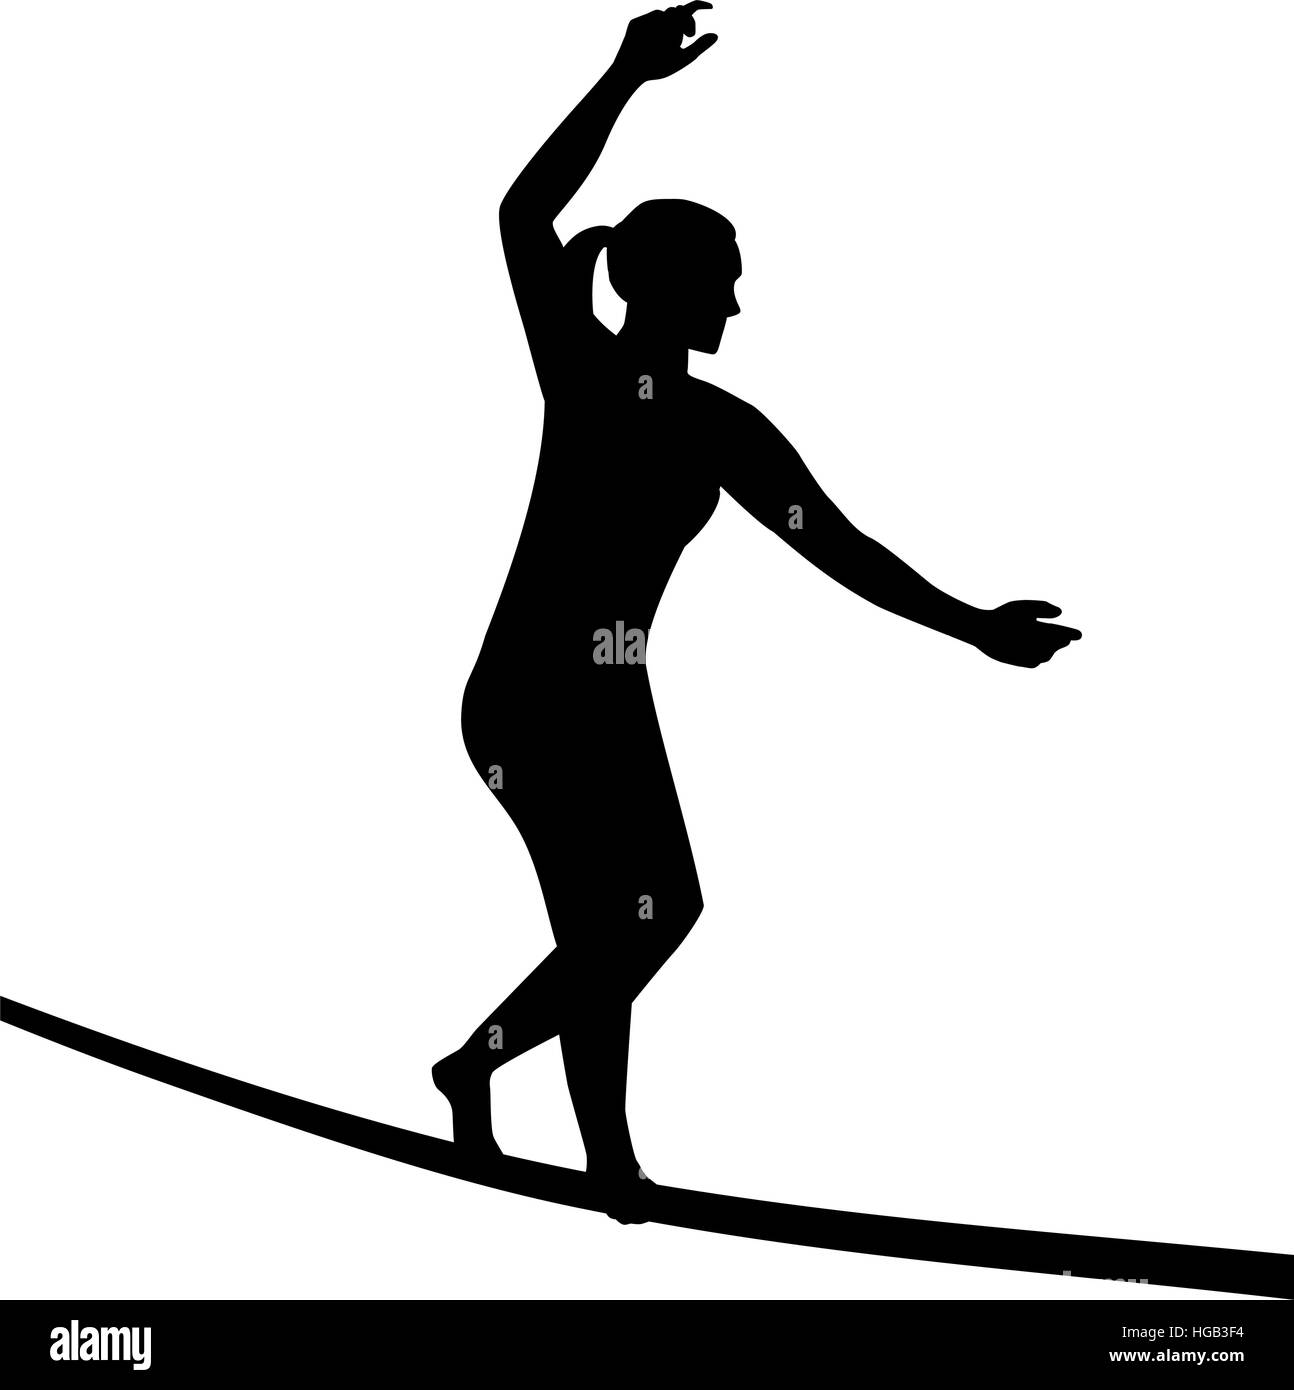 Tightrope walker woman Black and White Stock Photos & Images - Alamy